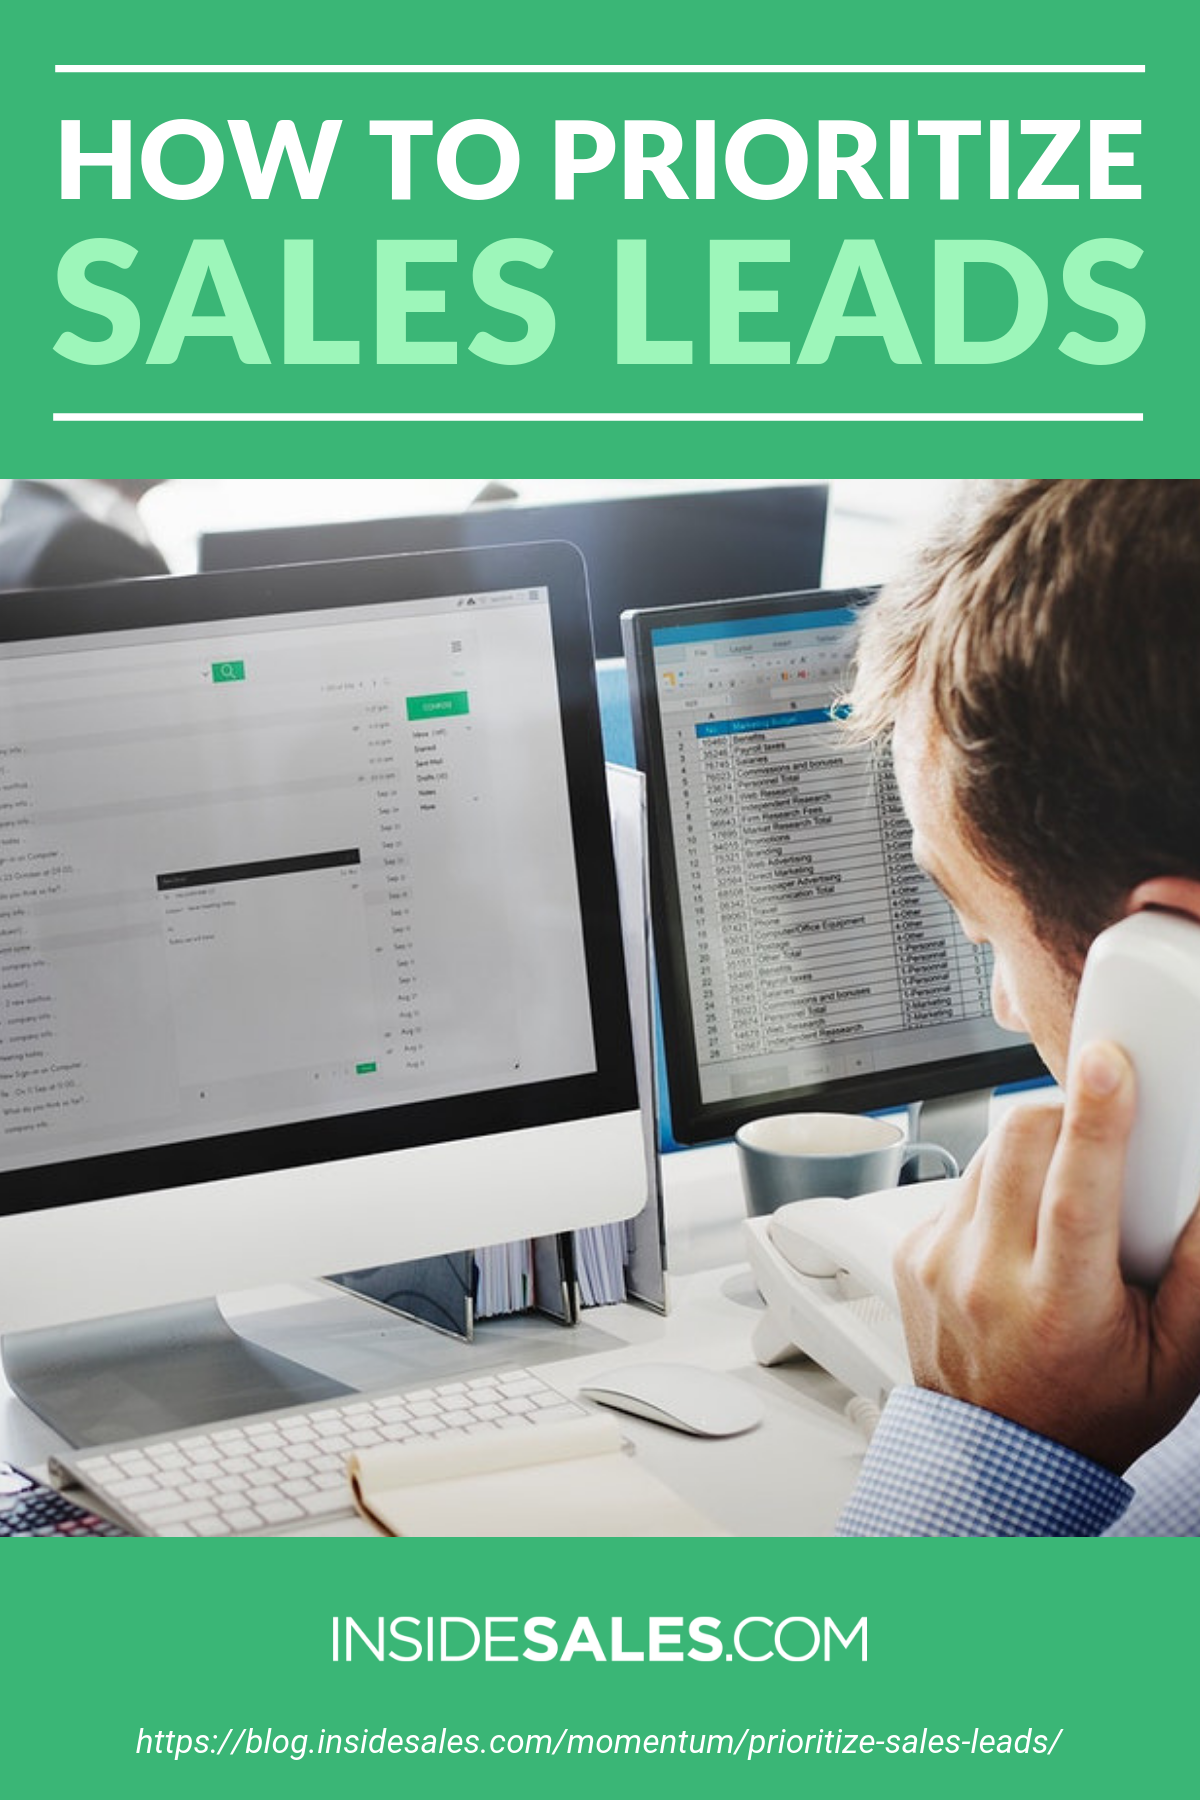 How to Prioritize Sales Leads https://resources.insidesales.com/blog/momentum/prioritize-sales-leads/